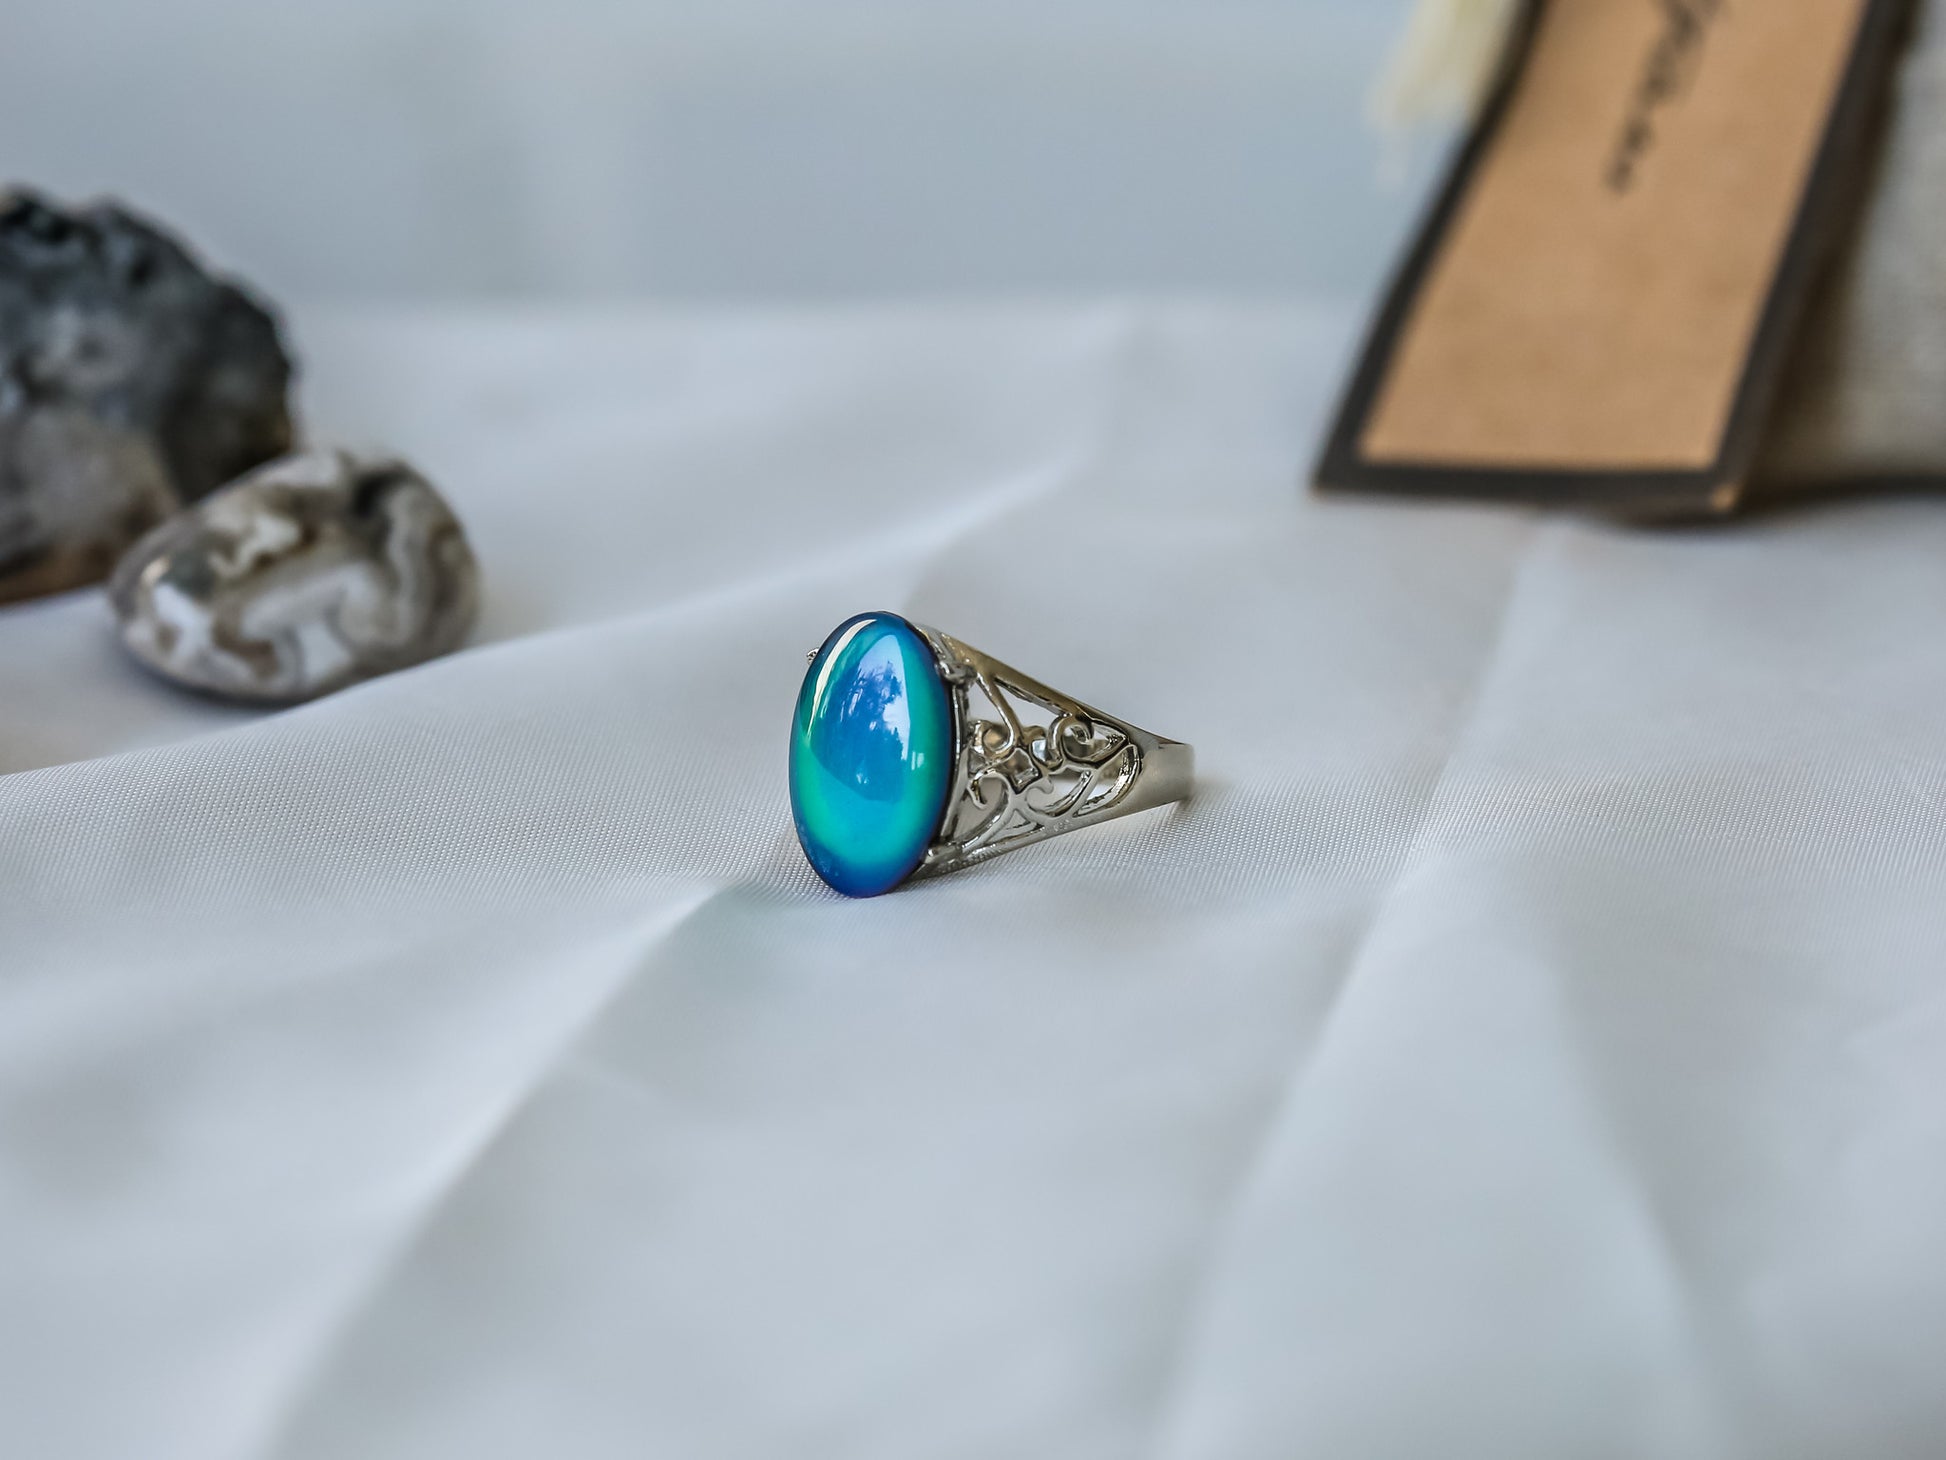 Limited Edition Borderless Oval Stone Mood Ring.